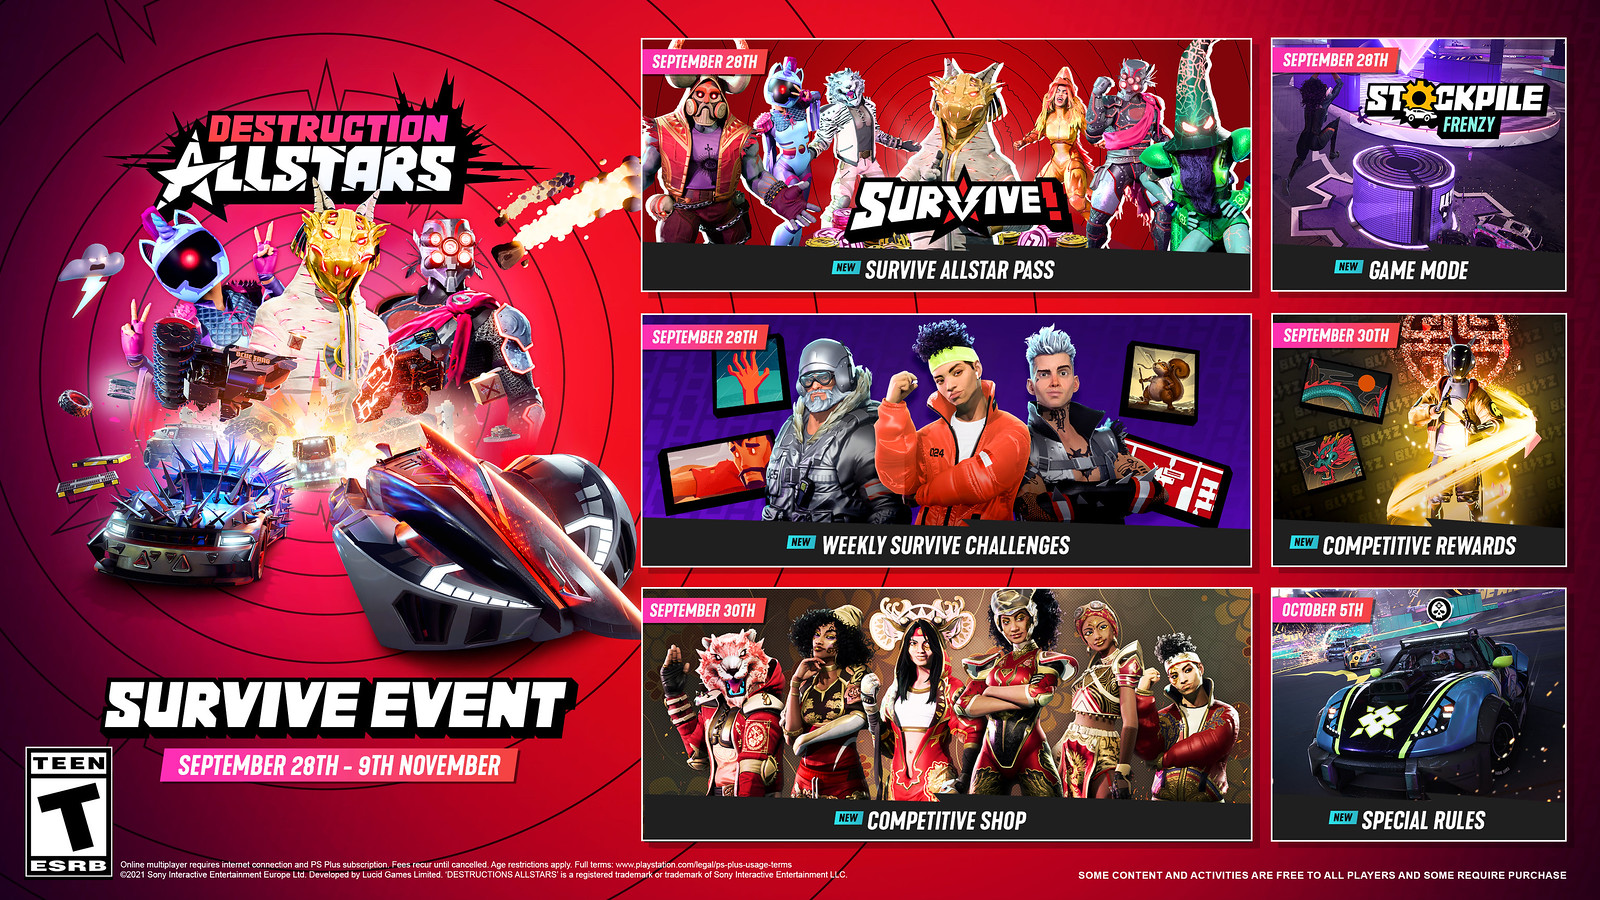 The Survive Event runs from September 20 to November 9.  The Survival AllStar Pass, Stockpile Frenzy Game Mode, and Weekly Survival Challenges will be available on September 28th.  Competitive rewards will become available on September 30th, along with the Competitive Store.  The special rules will come into effect on October 5th.  Some content and activities are free for all players, while others require purchase.